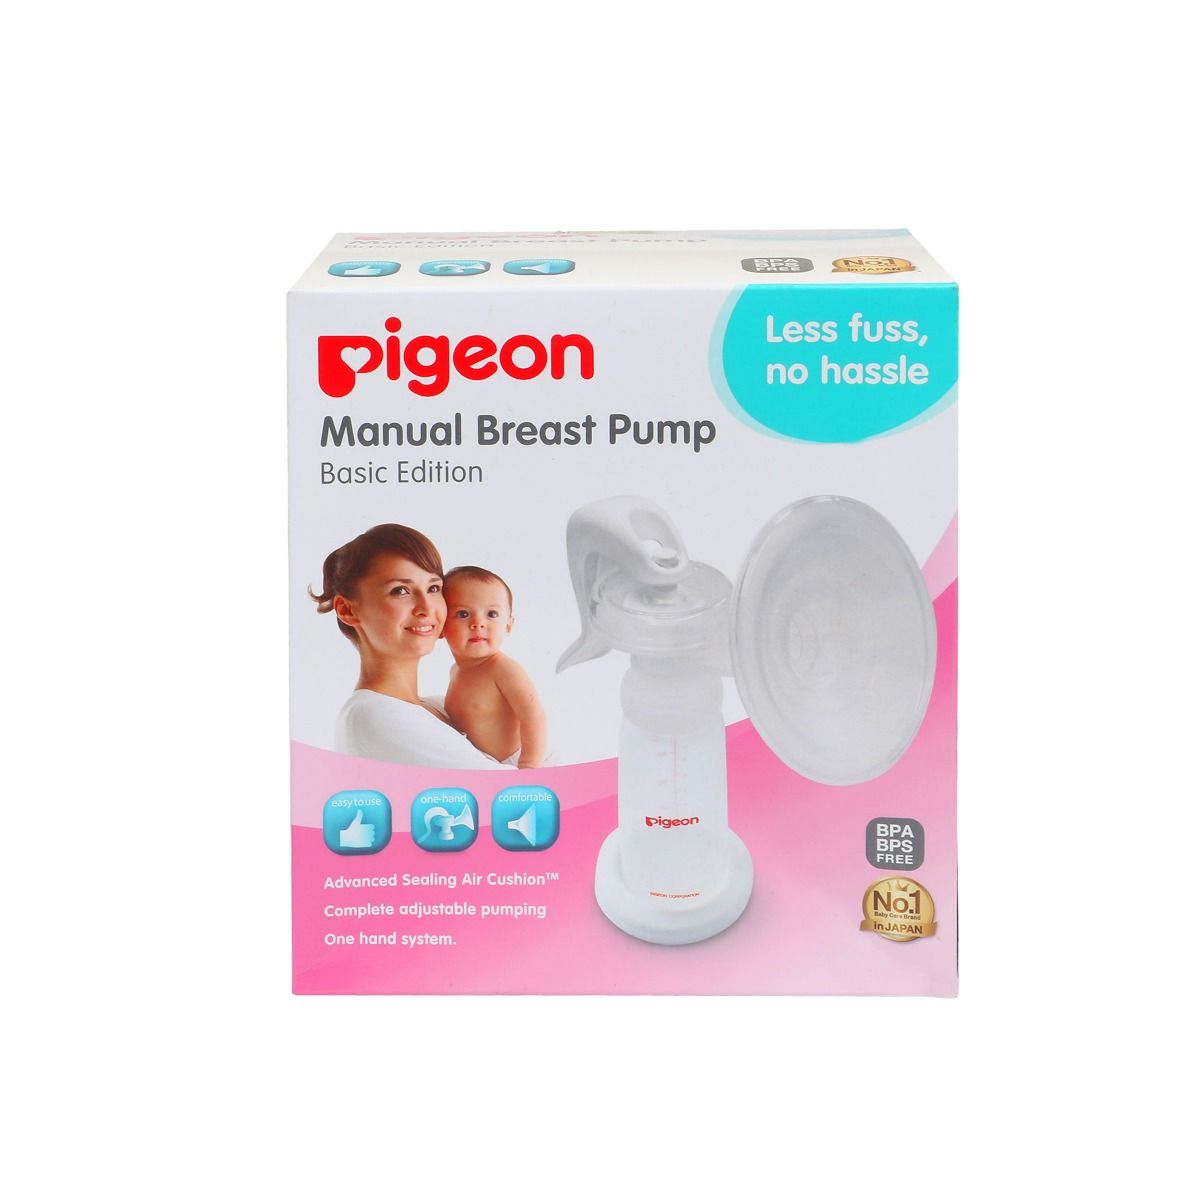 Buy Pigeon Manual Breast Pump Basic Edition, 1 Count Online